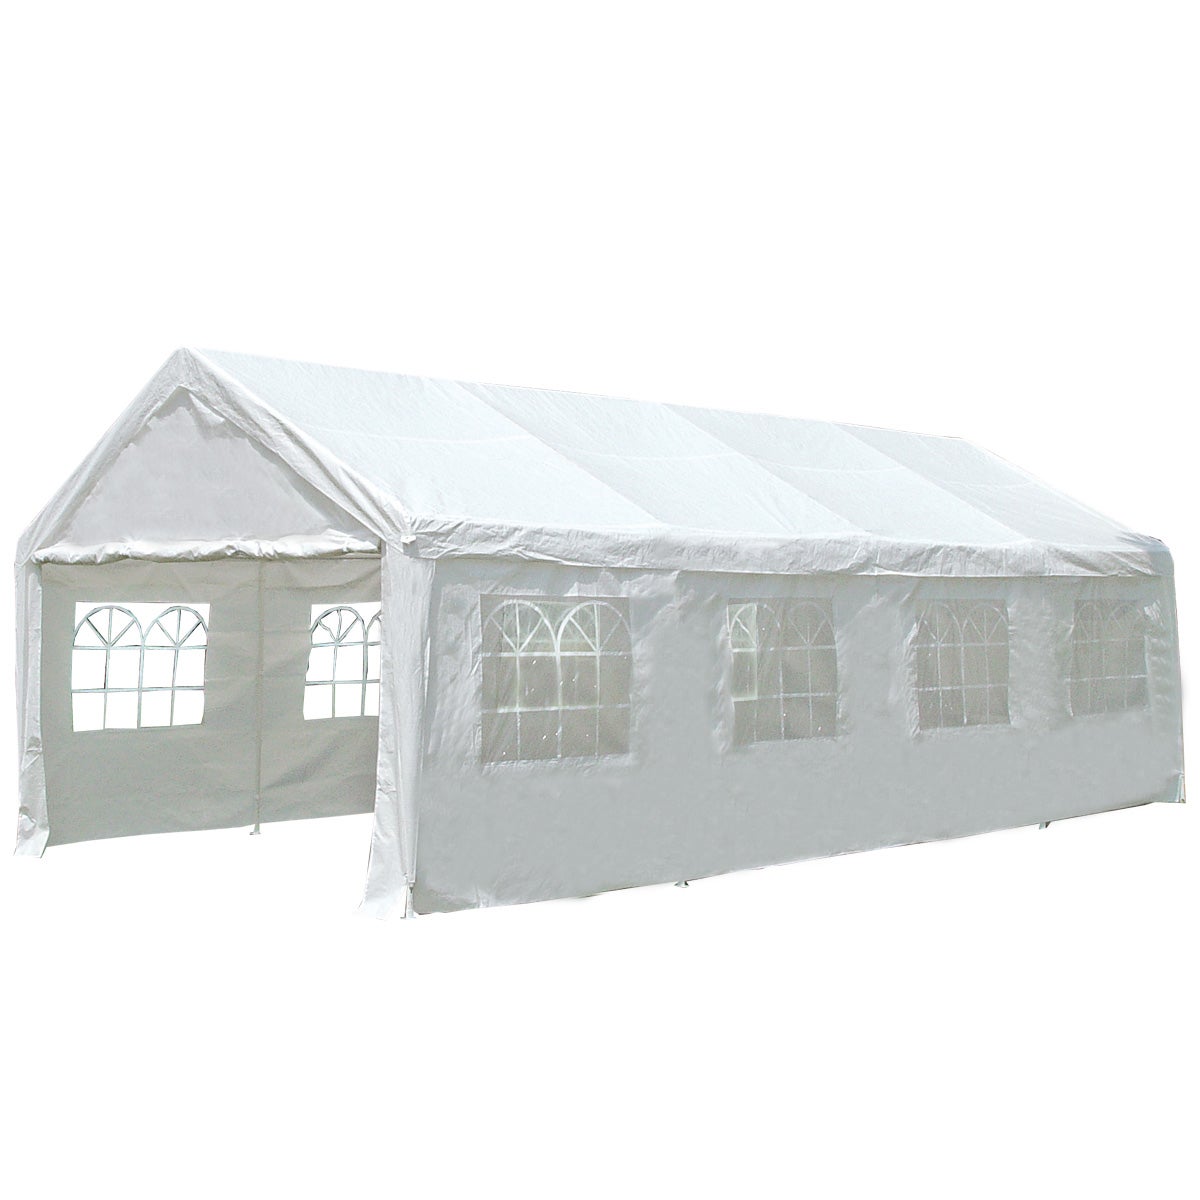 New White 4x8 Gazebo Party Wedding Tent Event Shade Marquee Outdoor Canopy